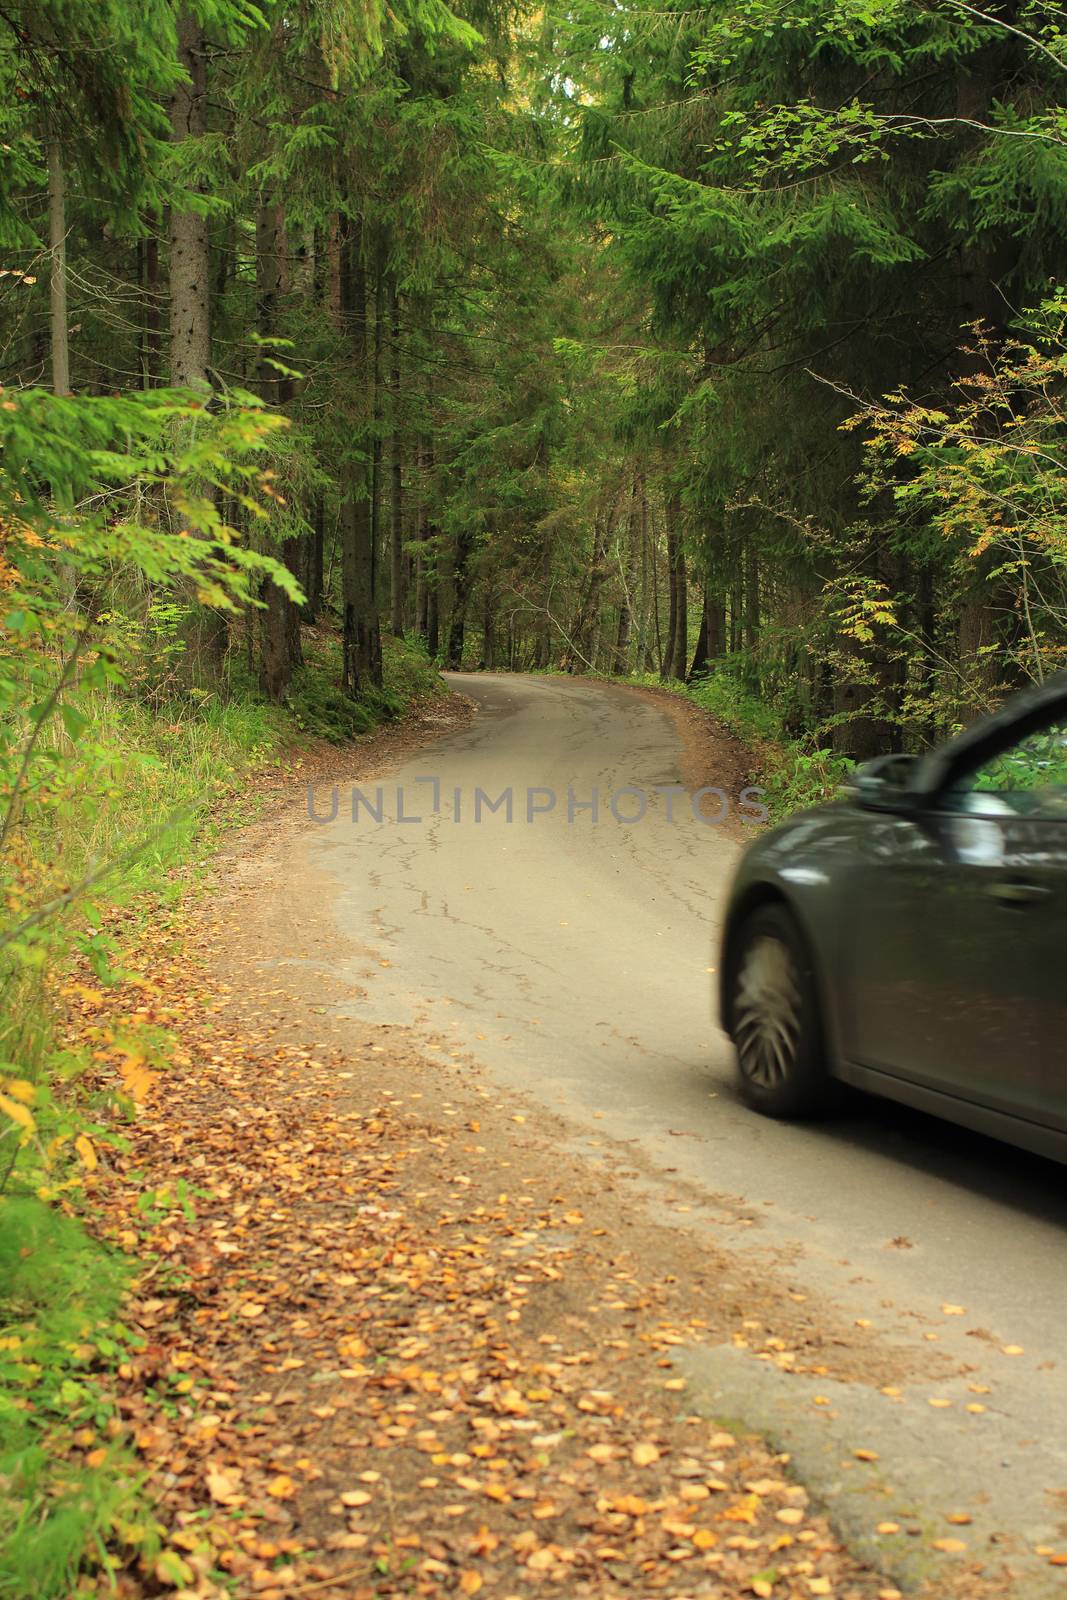 car trip on a amazing forest road by mrivserg